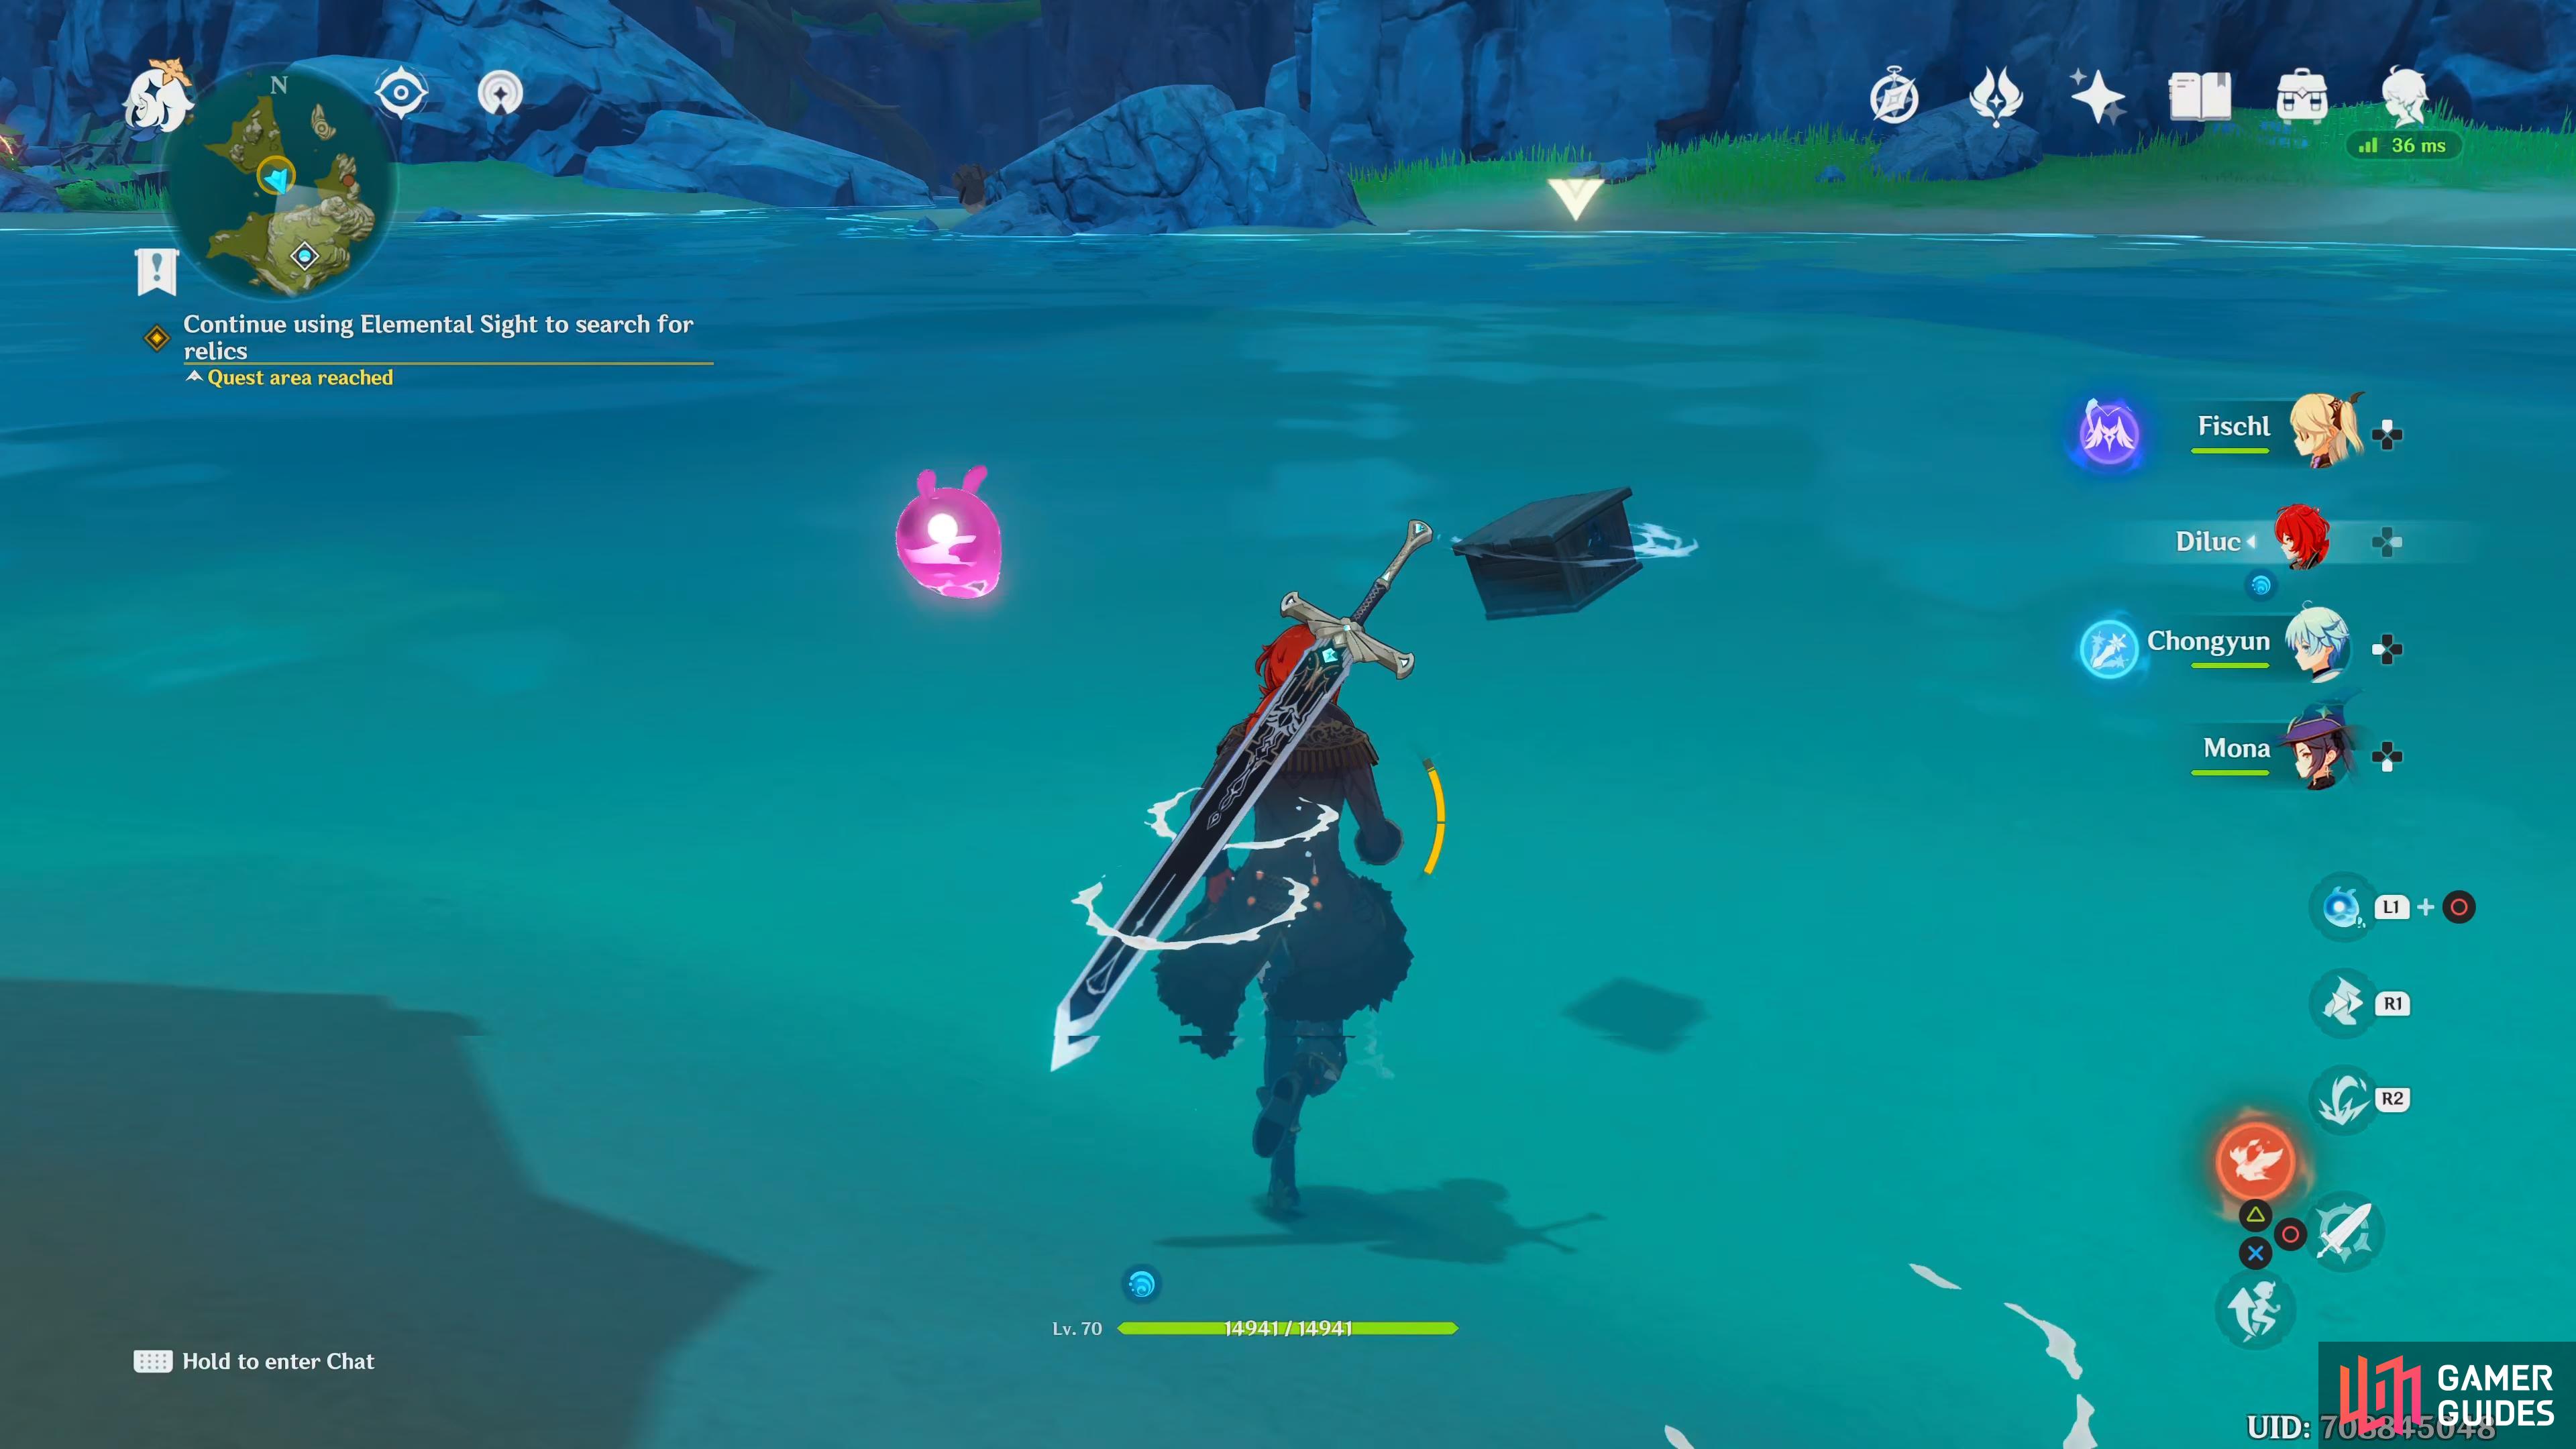 the floating box can be found in the sea, behind the rock.